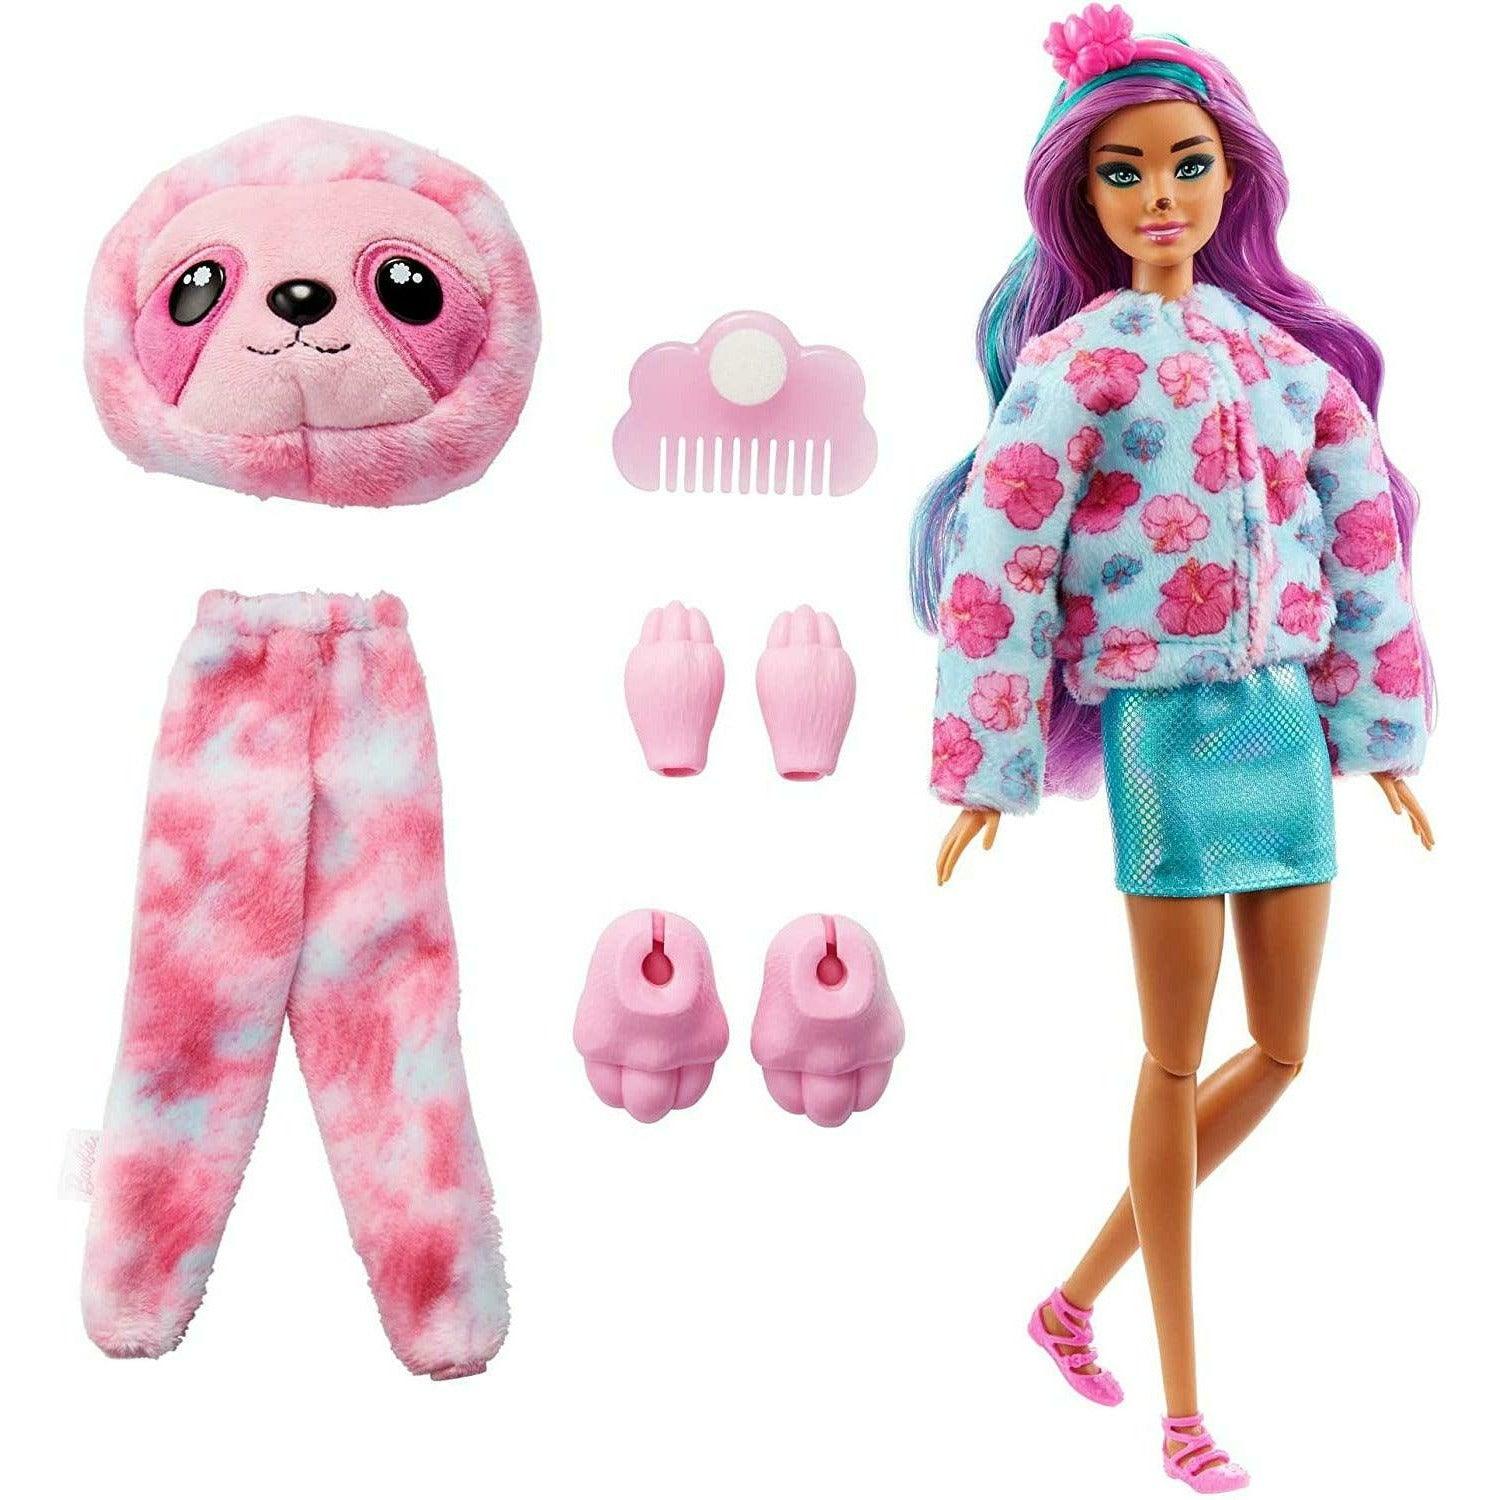 Barbie Cutie Reveal Fantasy Series Doll With Sloth Plush Costume & 10 Surprises Including Mini Pet & Color Change - BumbleToys - 5-7 Years, Barbie, Fashion Dolls & Accessories, Girls, OXE, Pre-Order